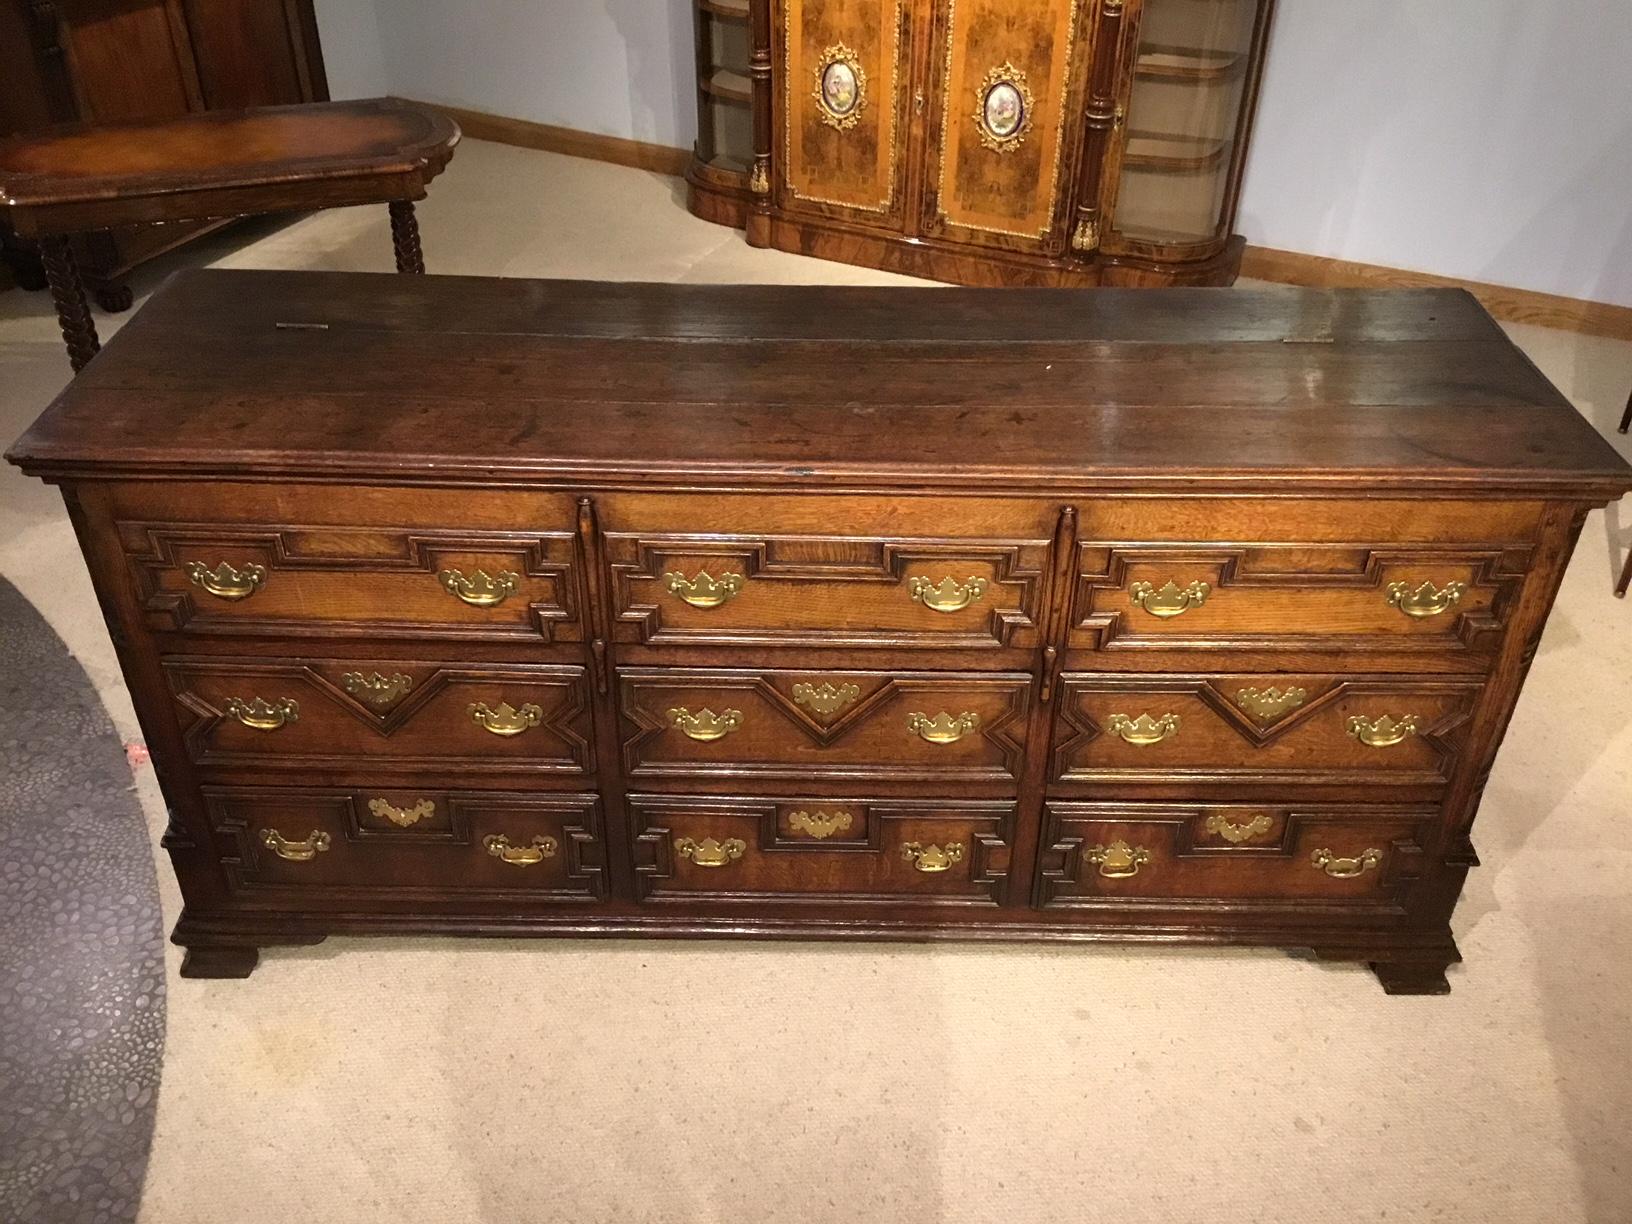 A good oak 18th century Lancashire mule chest. Having a rectangular hinged top opening to reveal storage space and a candle compartment. The chest has three 